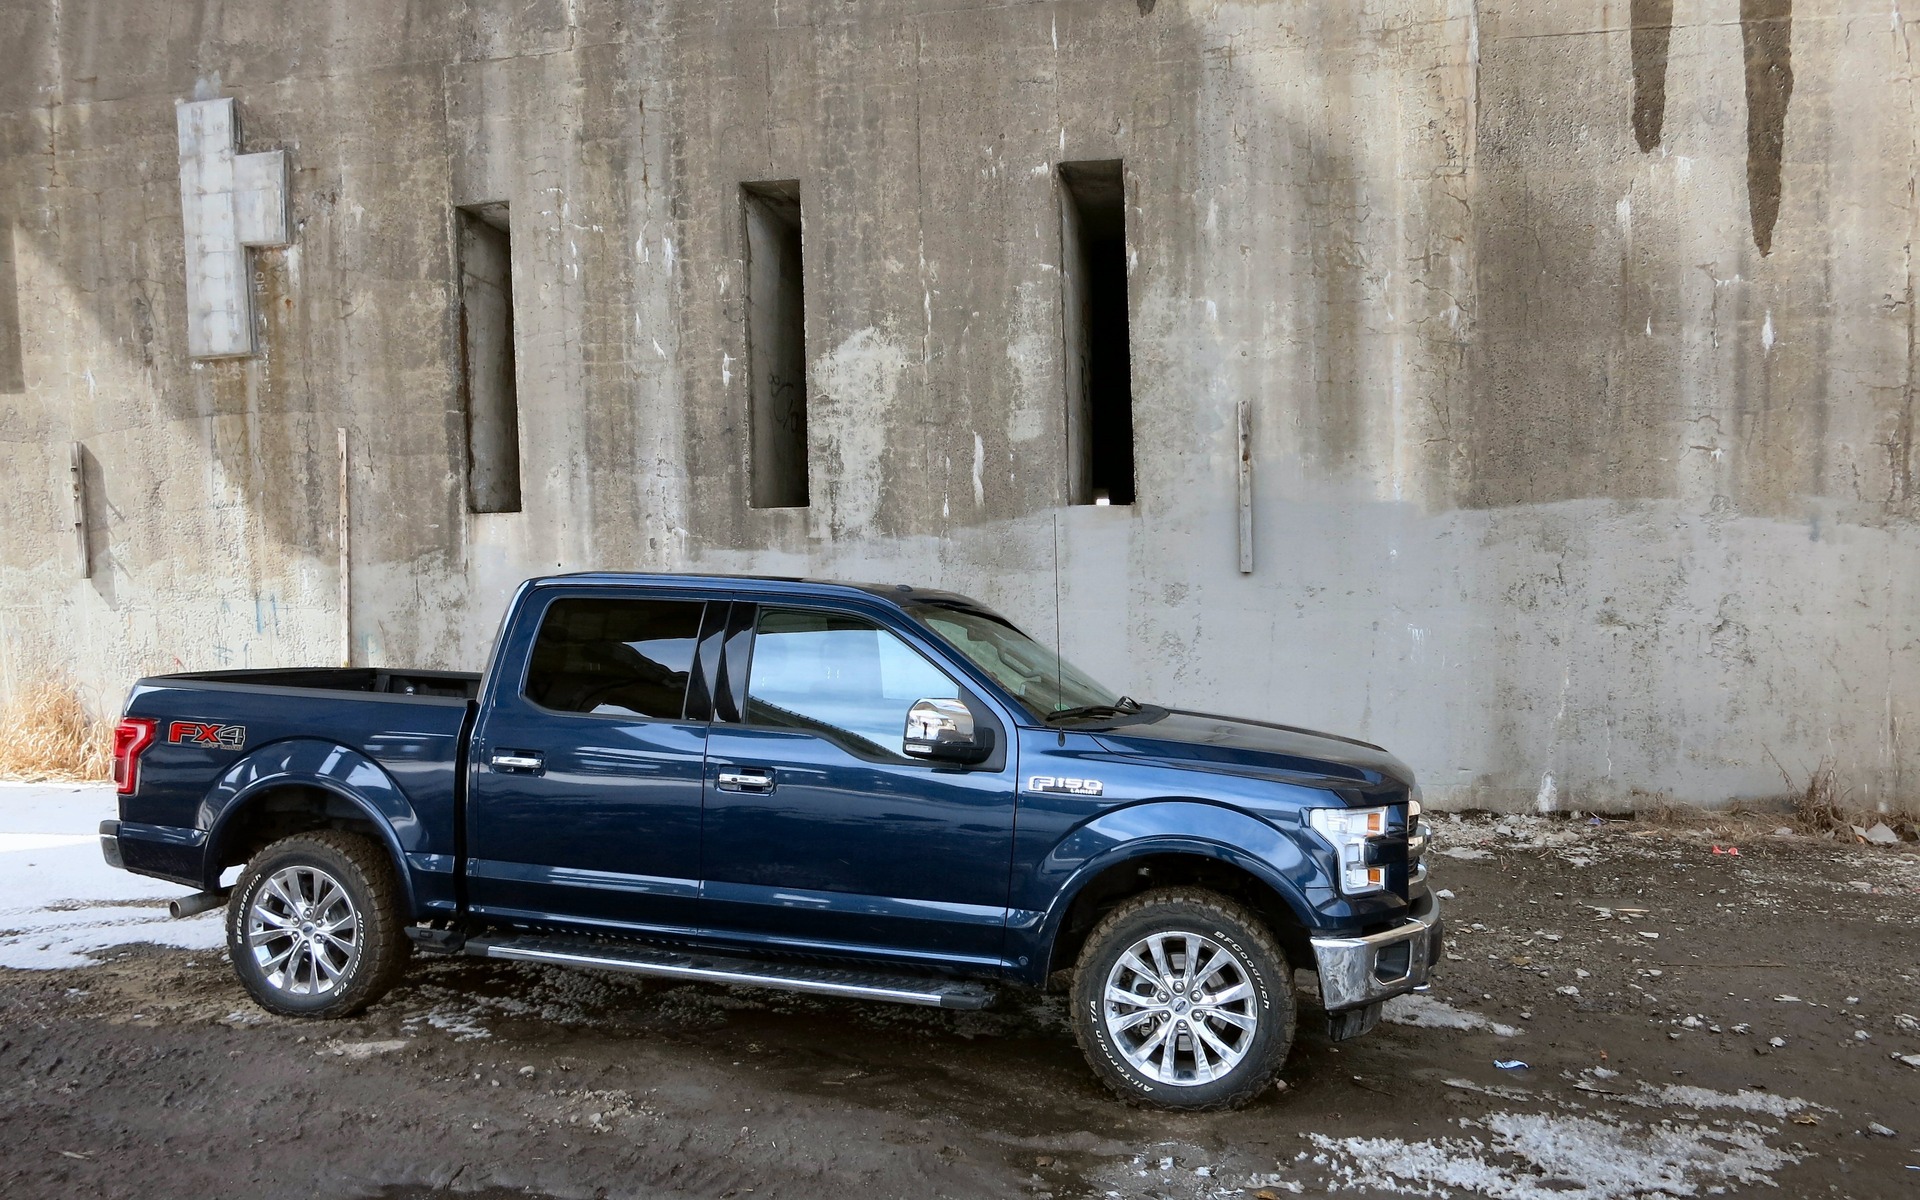 Ford's only real misfortune with its new truck is timing.